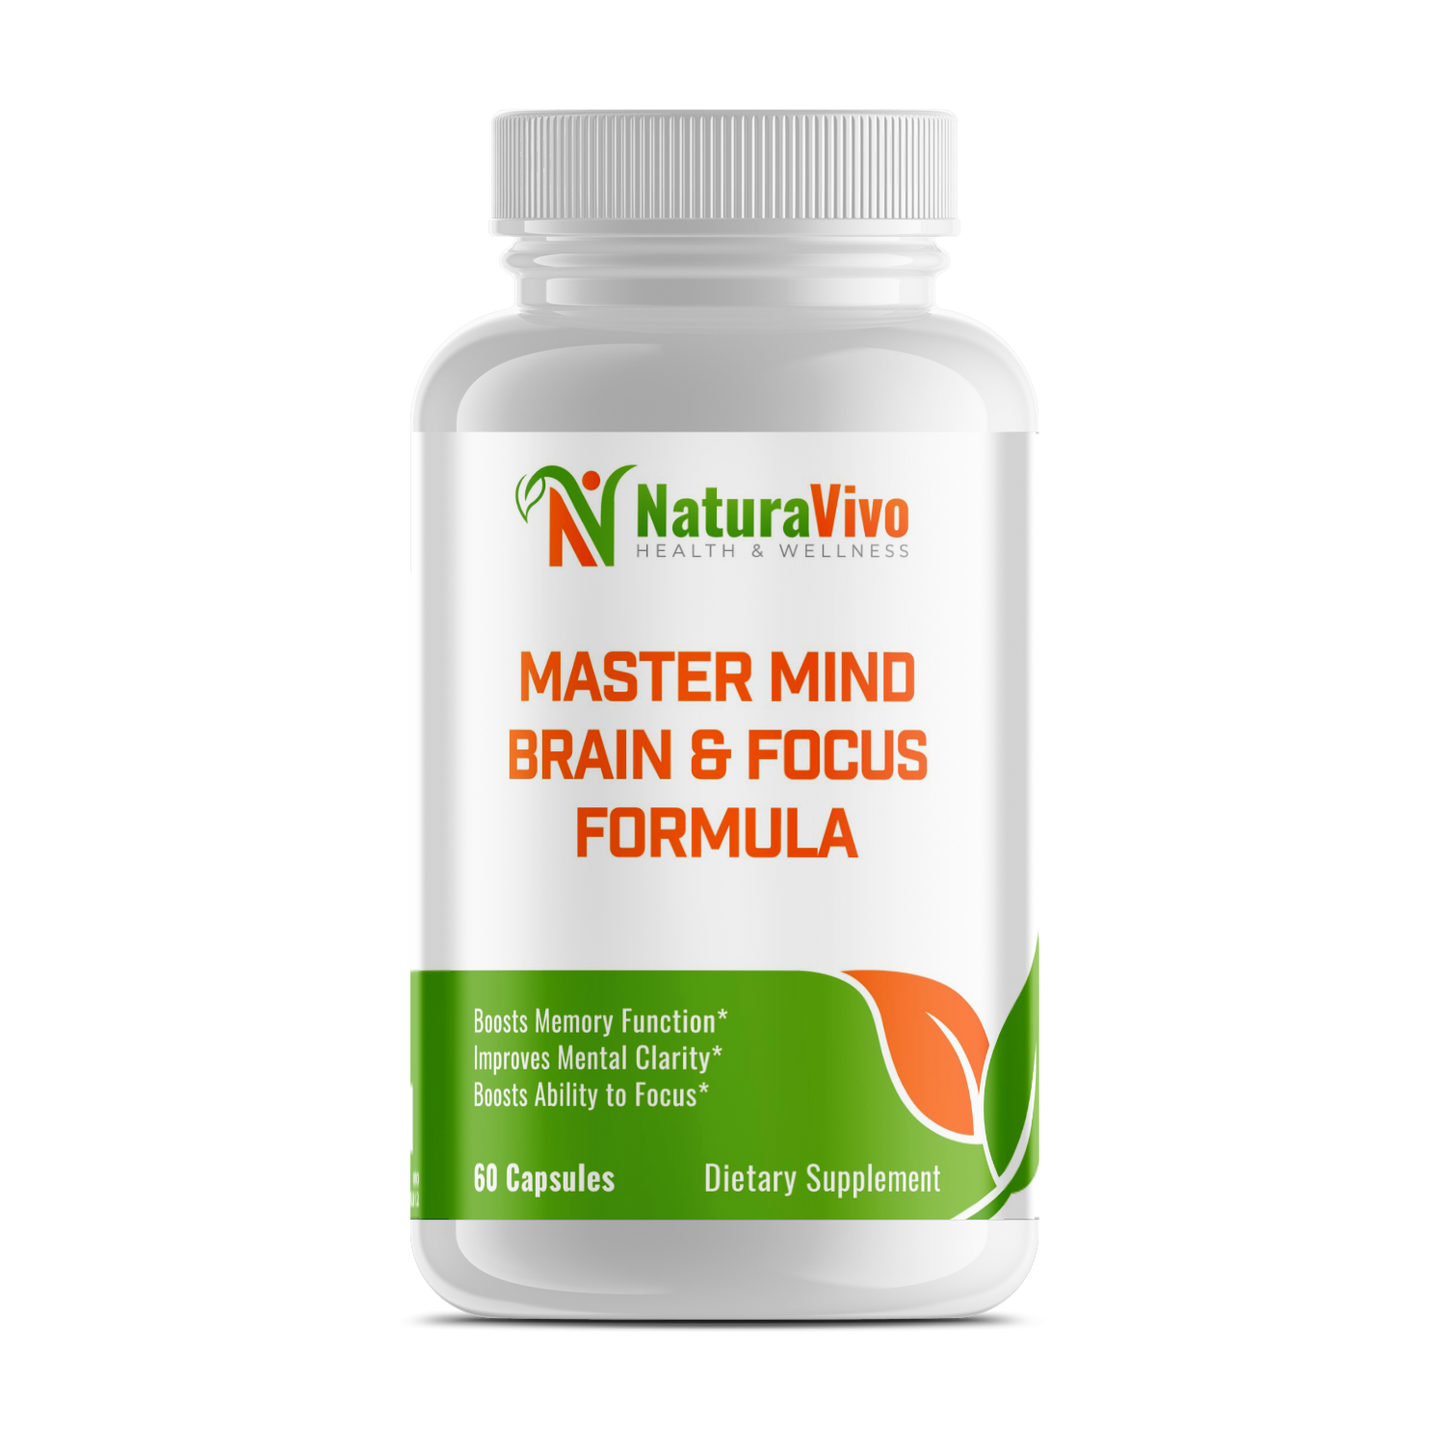 Master Mind Brain & Focus Formula - Nootropic Supplement for Improved Focus, Memory, and Clarity - Energy Booster with Vitamins & Minerals